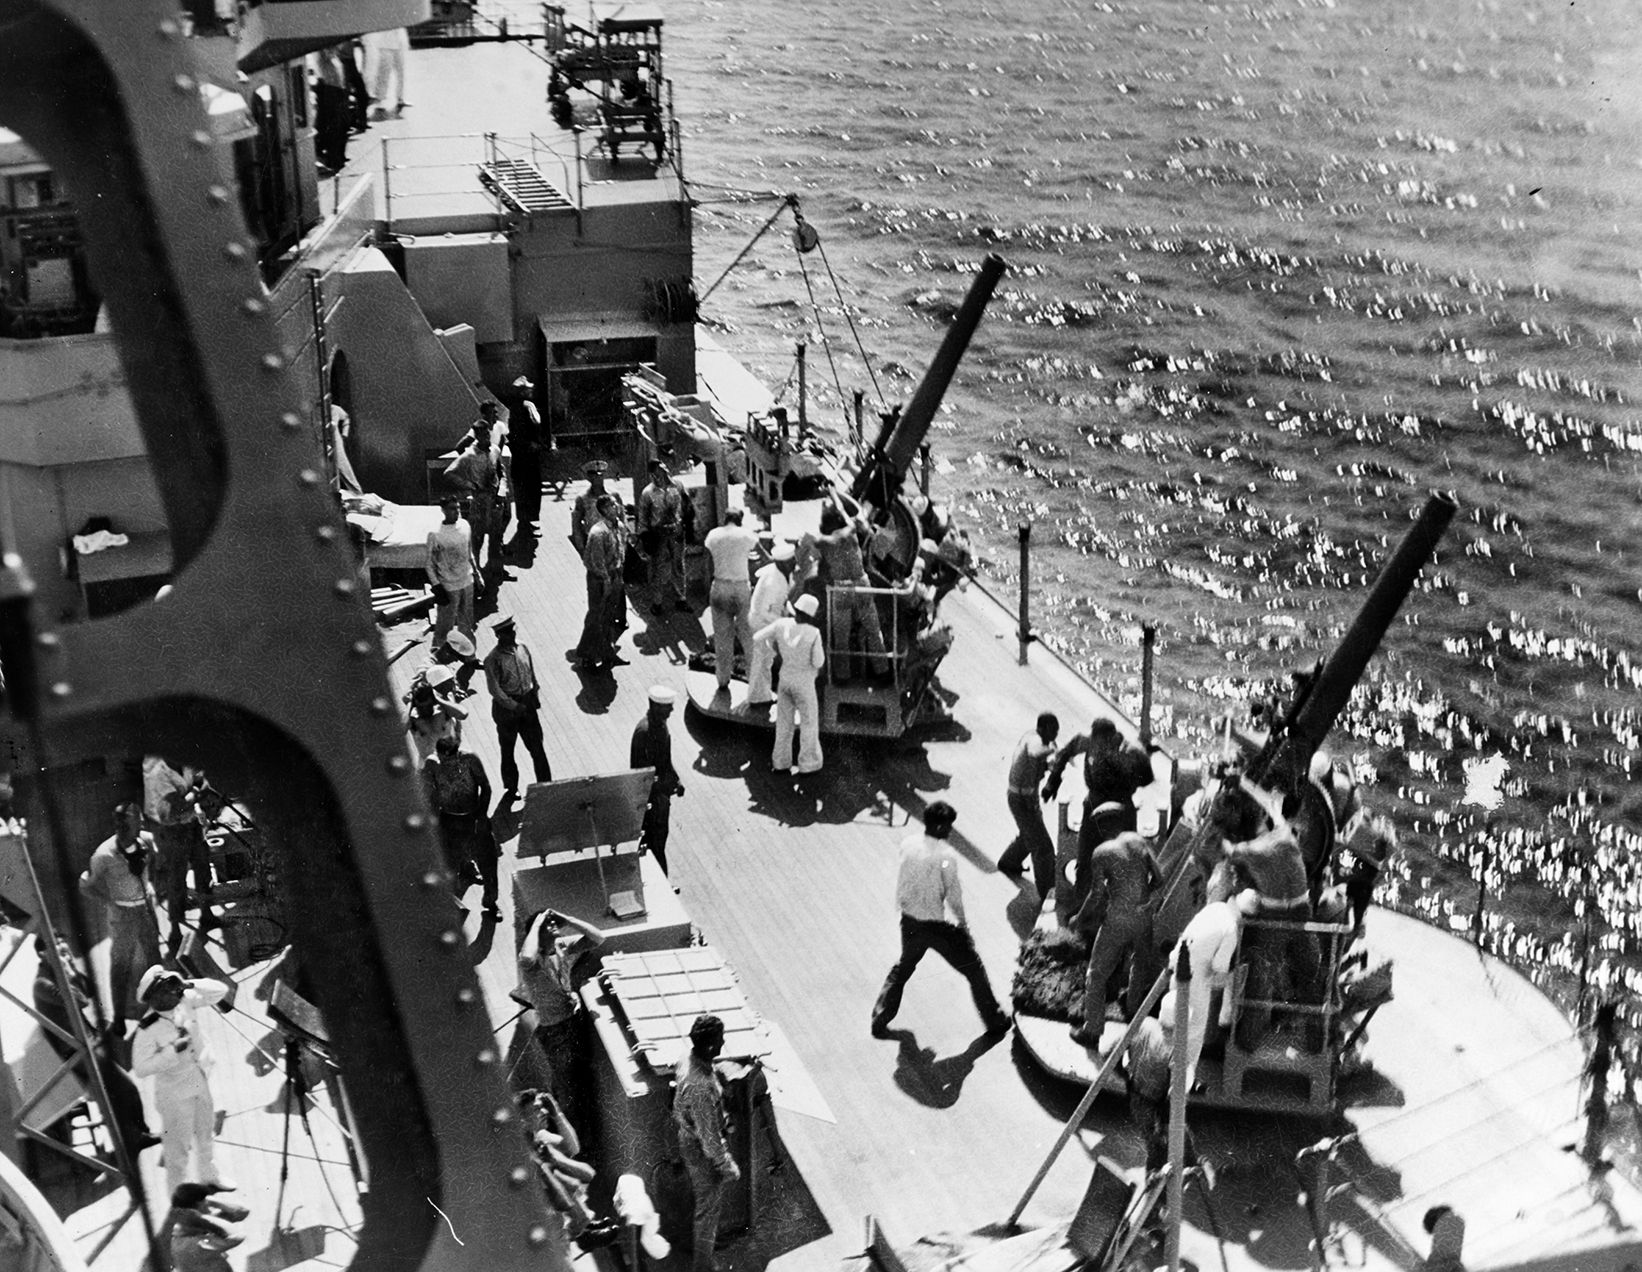 The starboard 5/25 anti-aircraft gun crews of the cruiser USS Houston swing into action during anti-aircraft drills off the coast of China. The Houston crew fought bravely against superior Japanese forces in the East Indies. 
